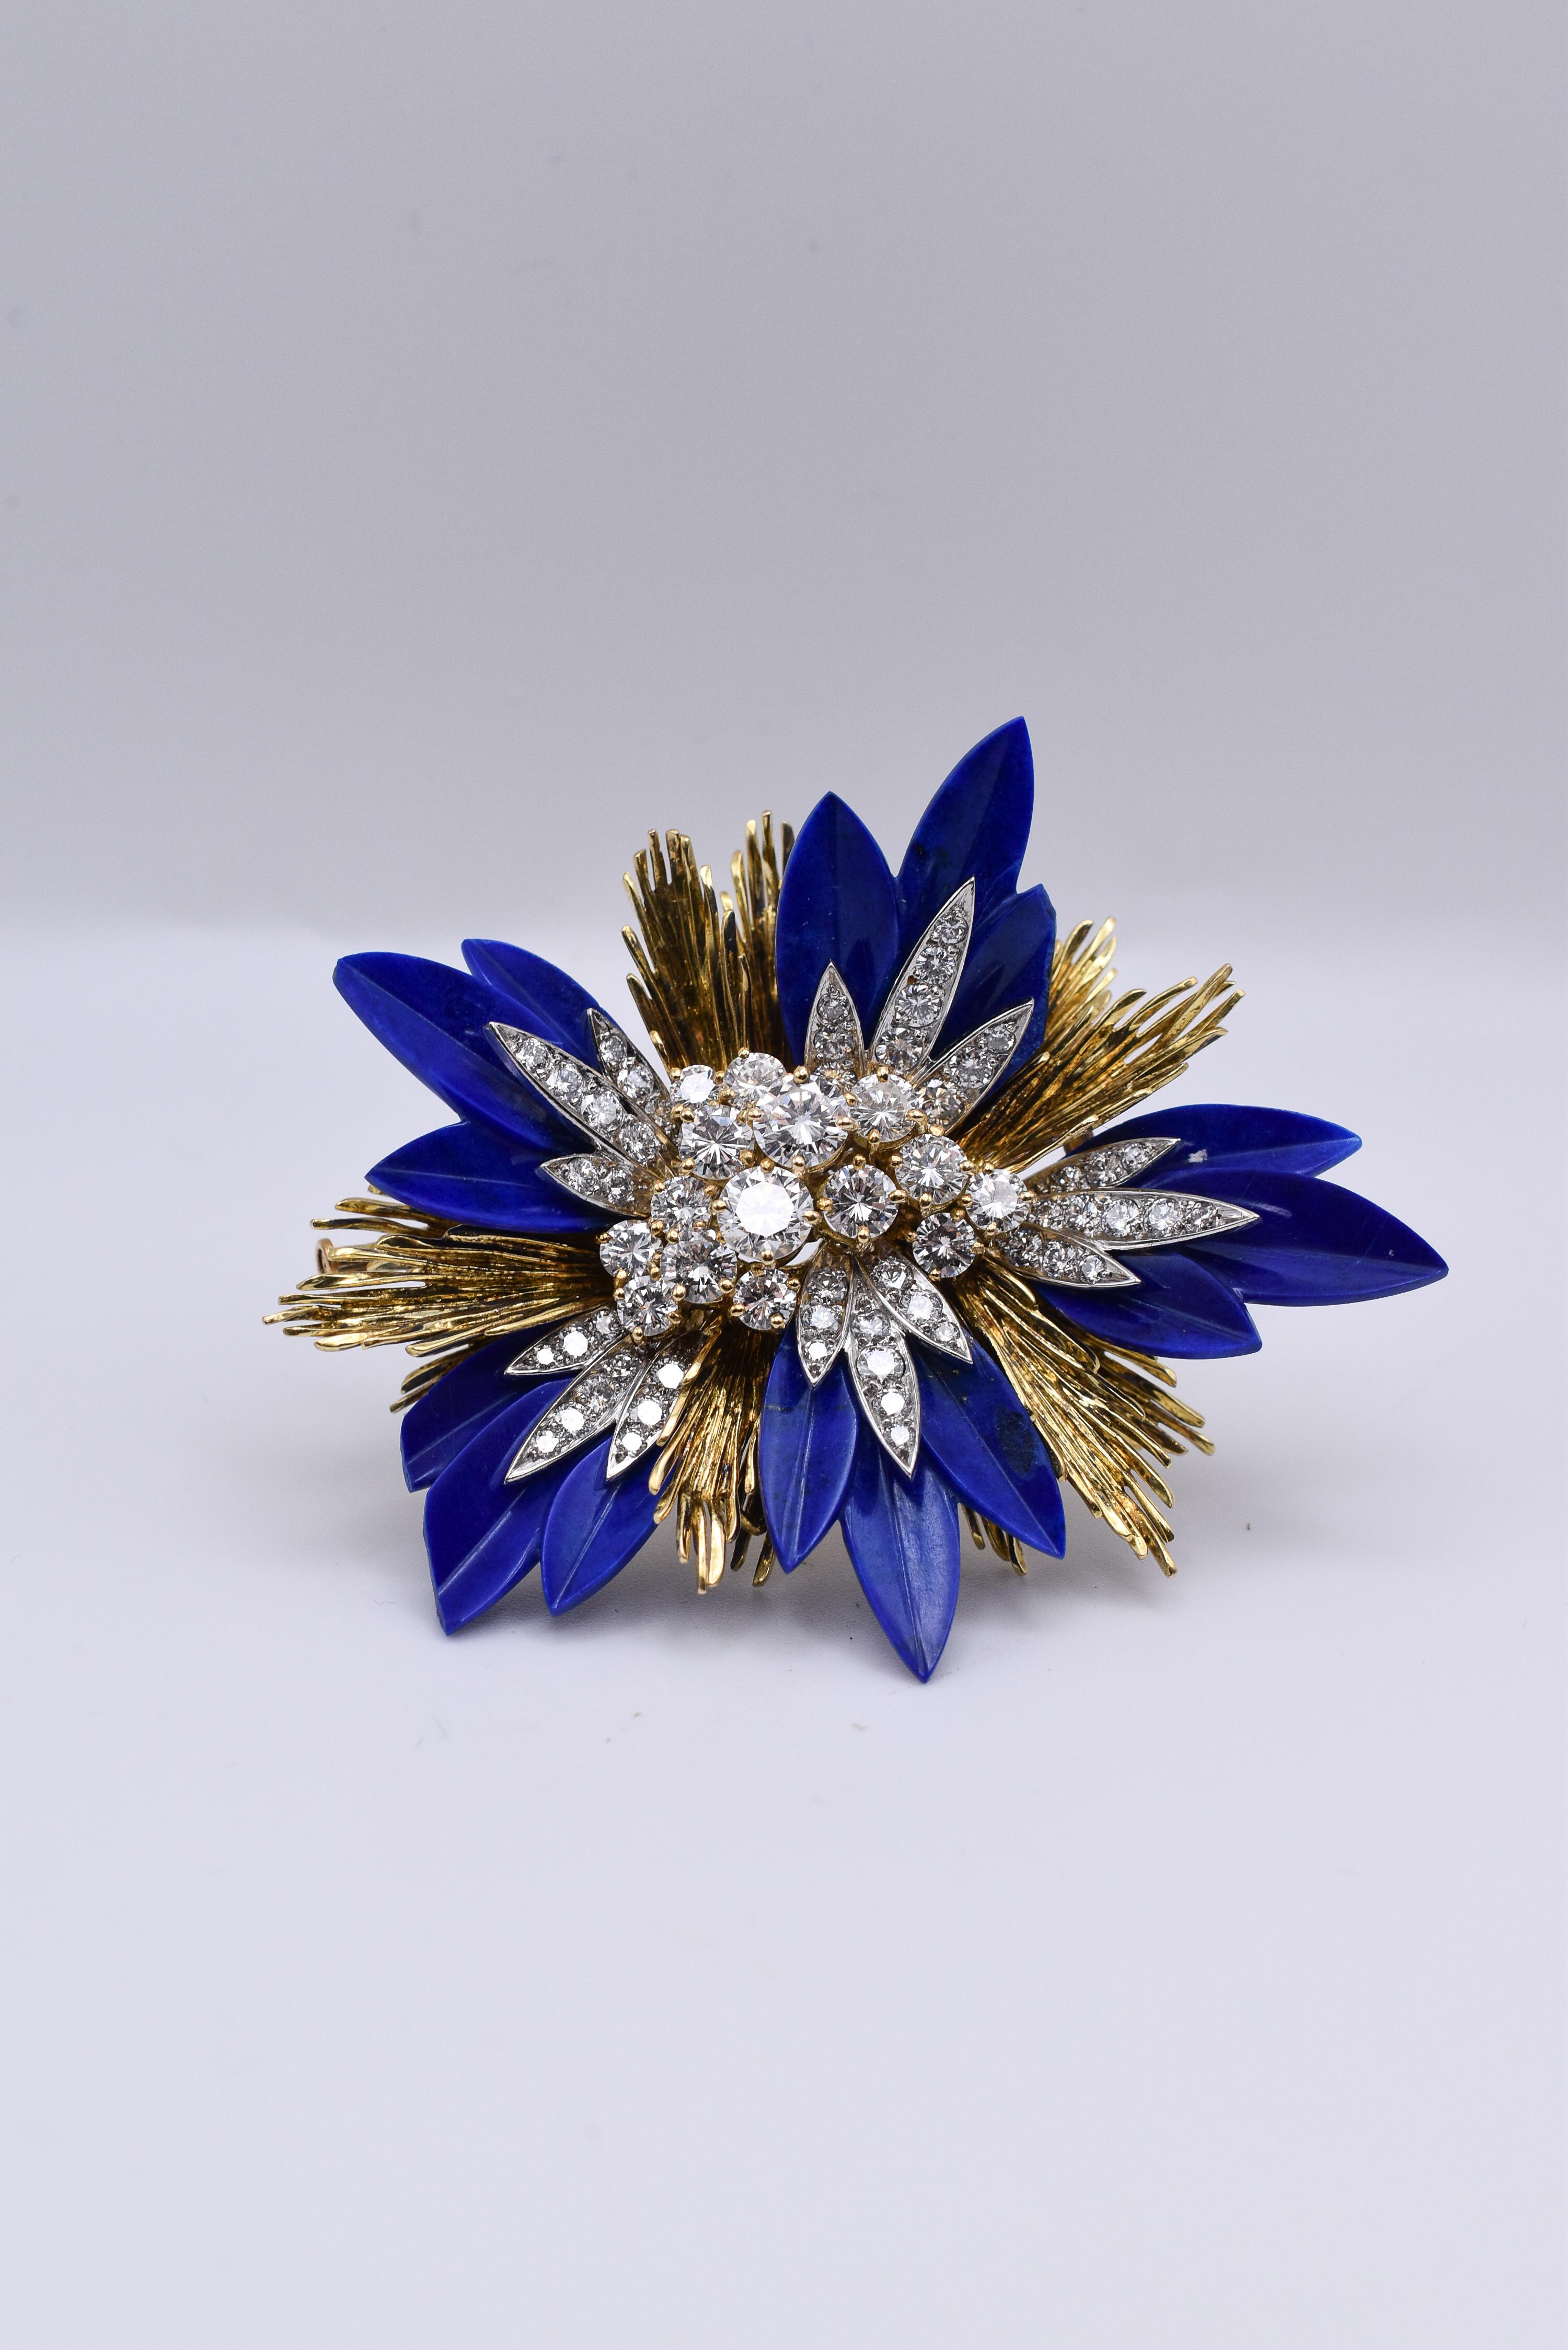 An elegant French Retro Diamond and Lapis Lazuli Brooch mounted in 18k Yellow Gold. Made in France, circa 1960.

Max Width: 67mm
Gross weight: 45 grams